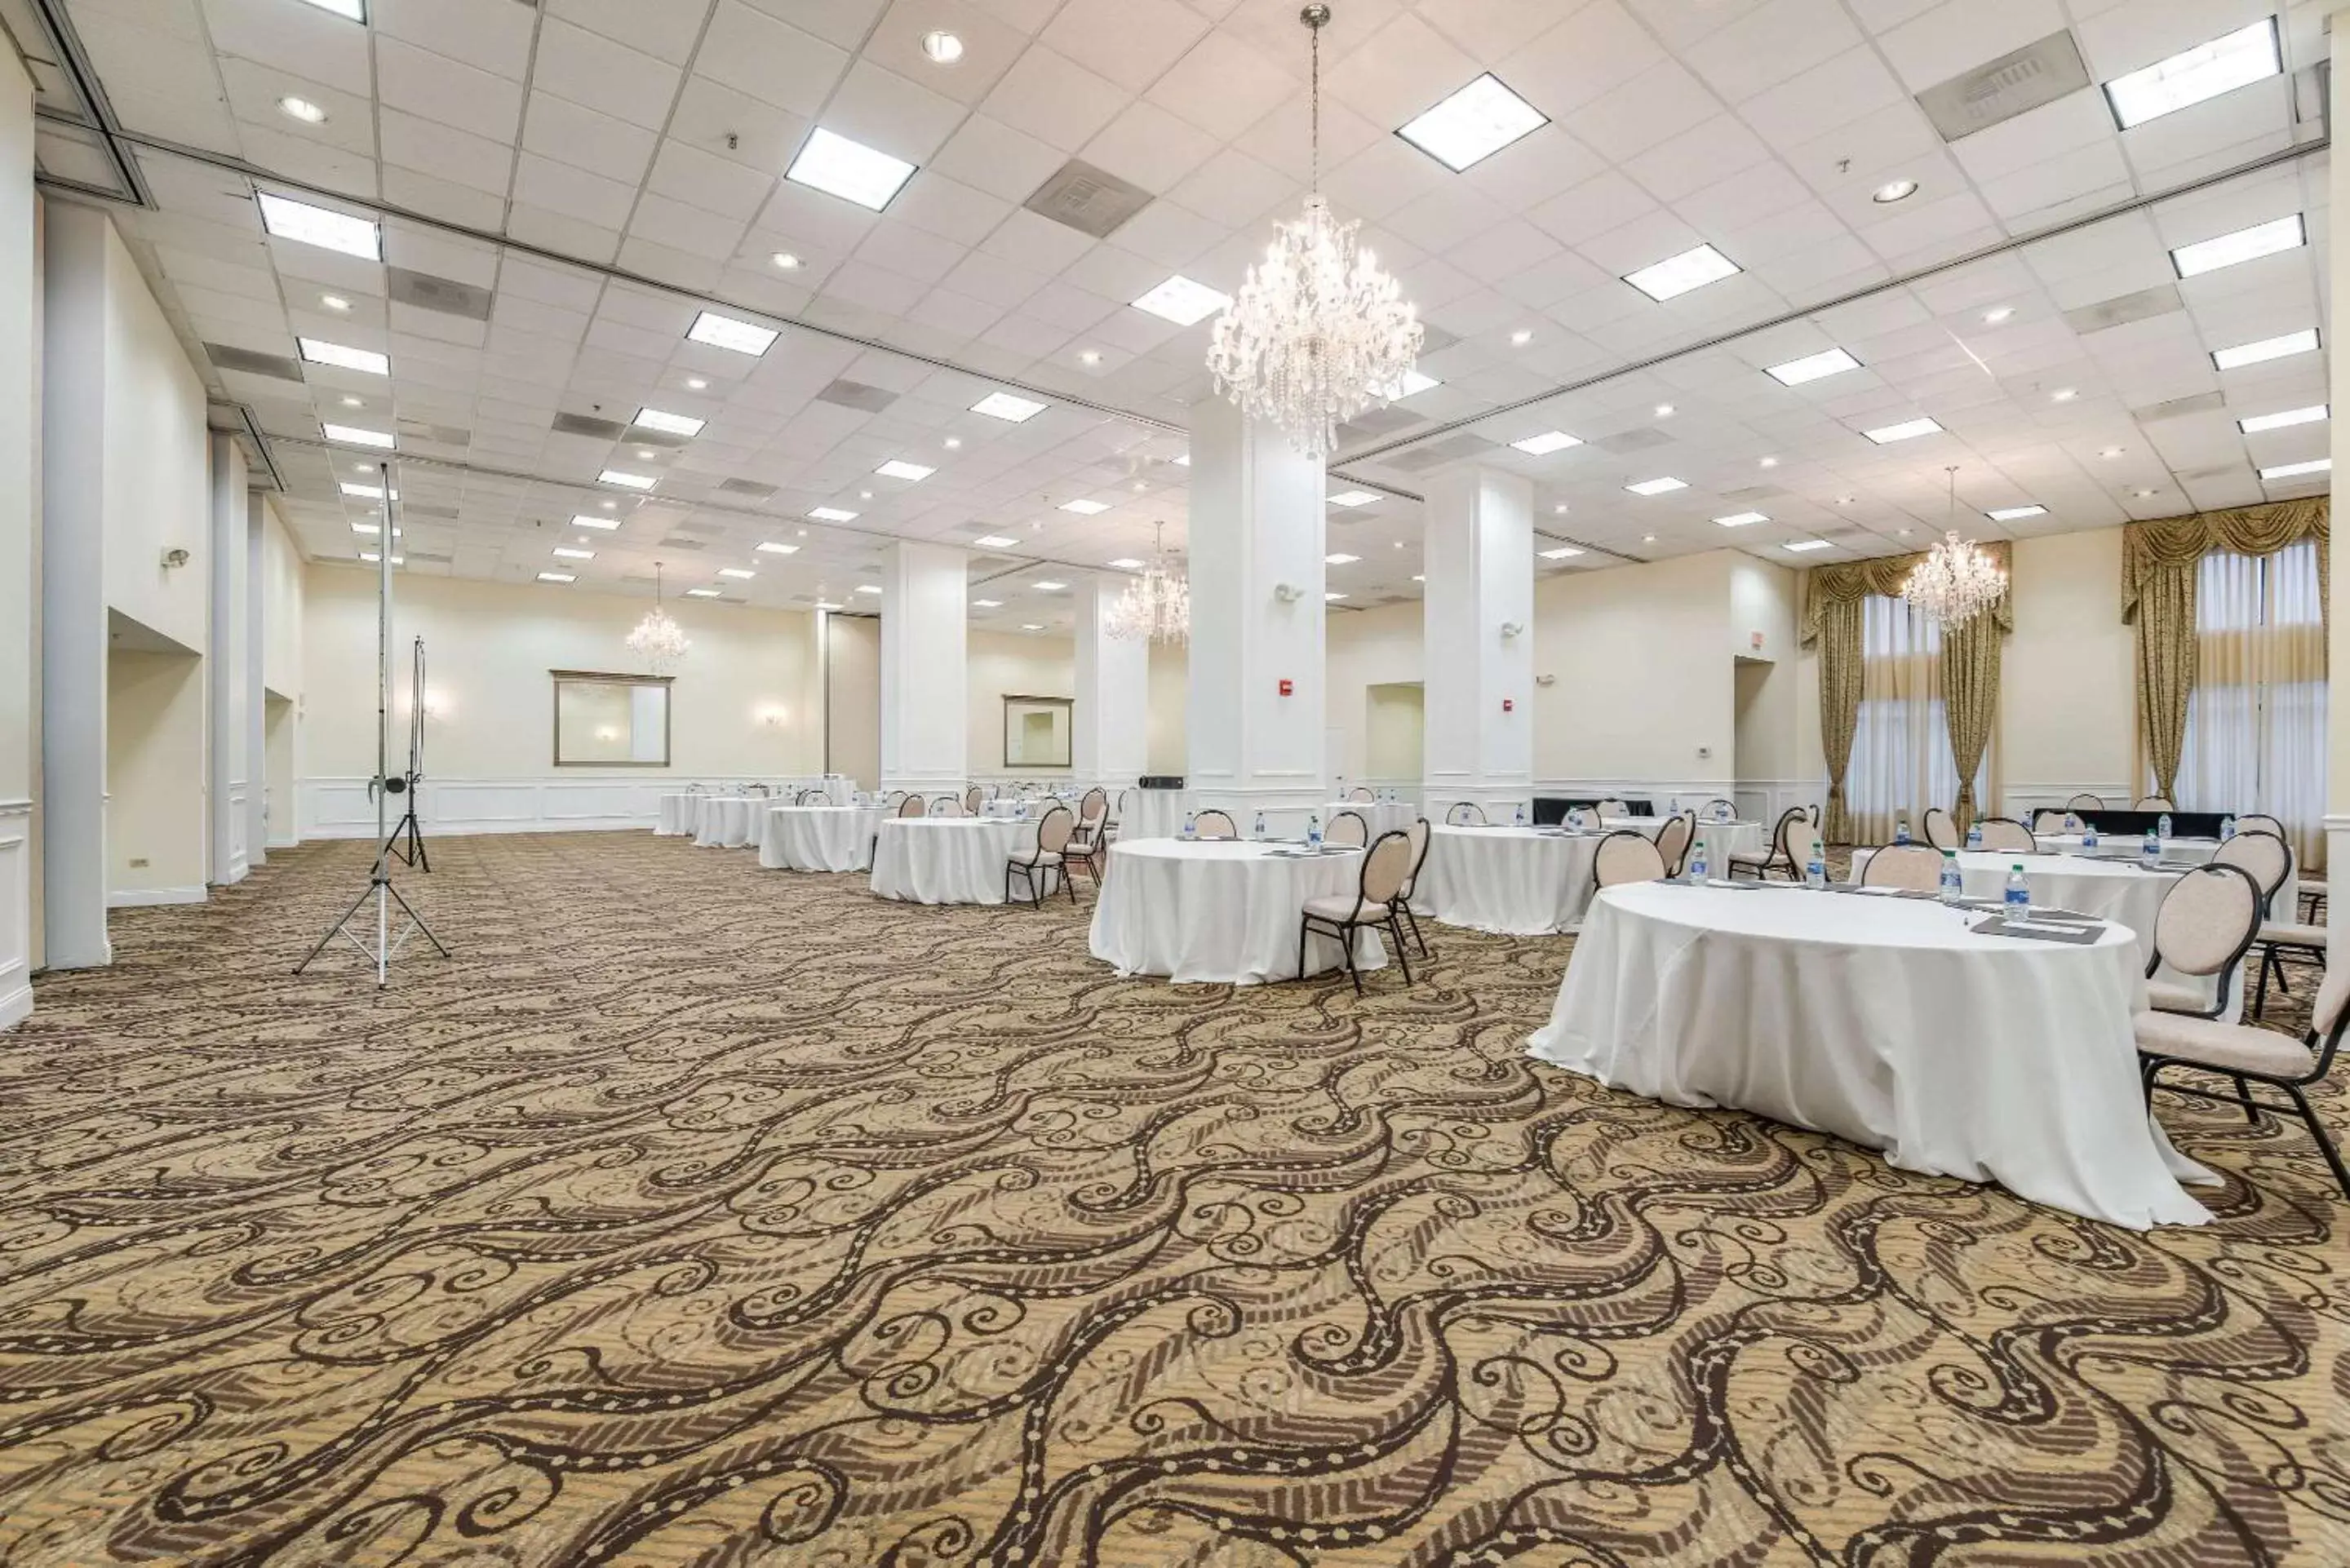 On site, Banquet Facilities in Comfort Suites Chicago O'Hare Airport